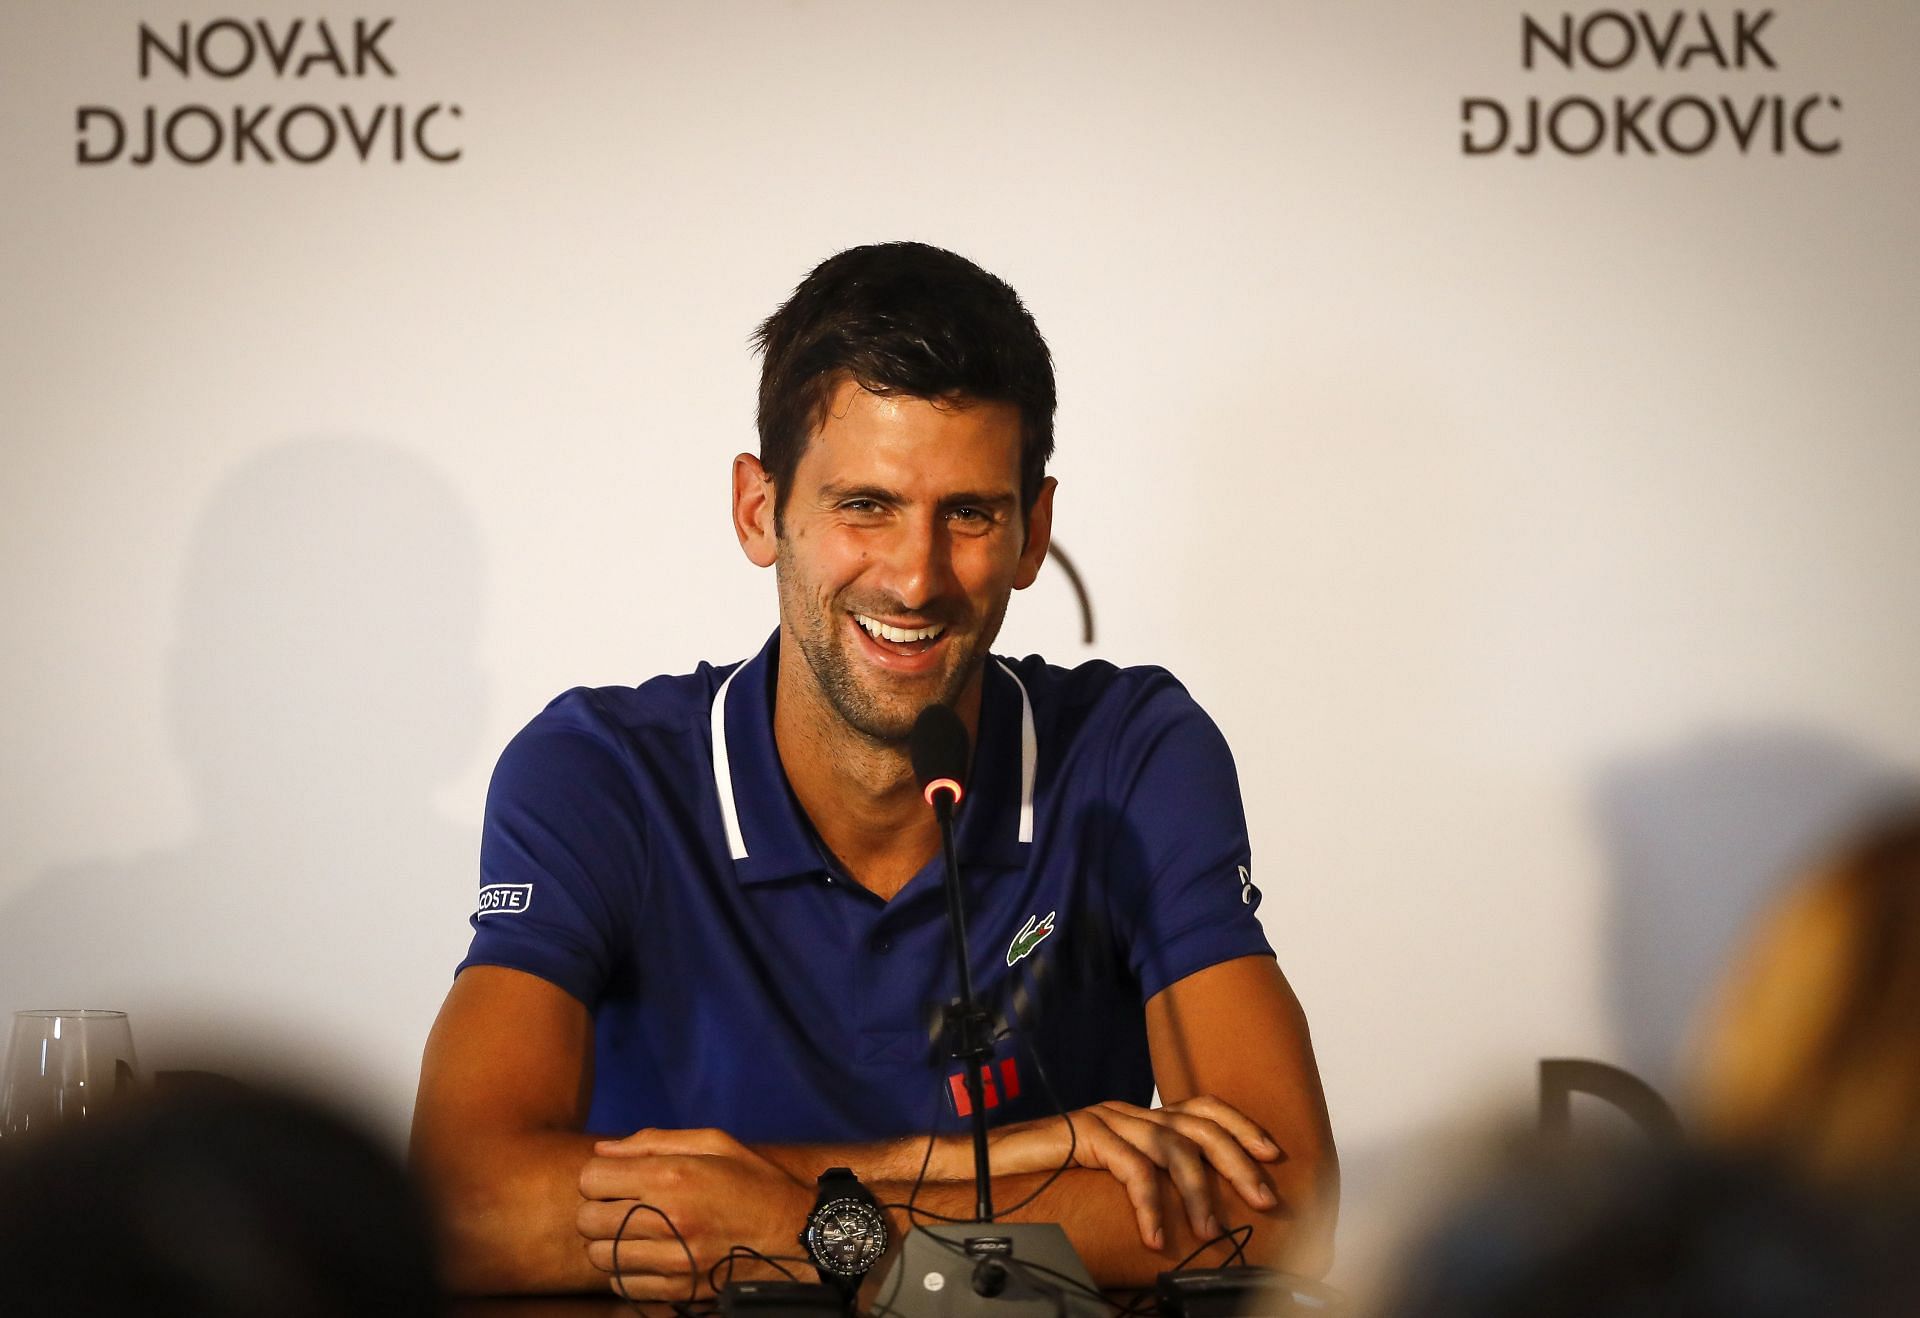 Novak Djokovic considers his tennis academy to be one of his biggest life projects